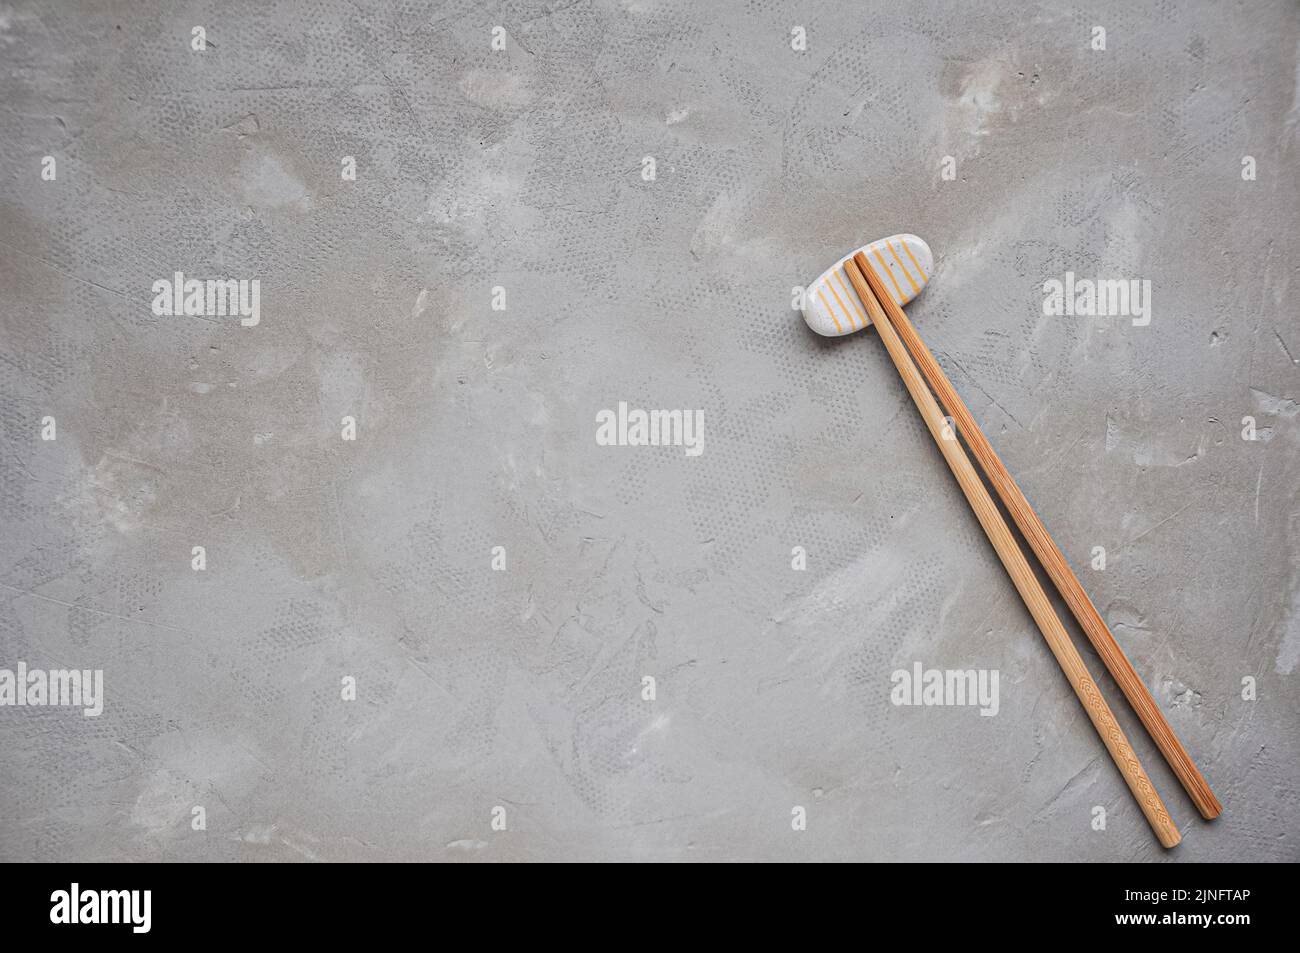 Wooden chopsticks and chopstick rest on a gray background. Top view. Copy space Stock Photo